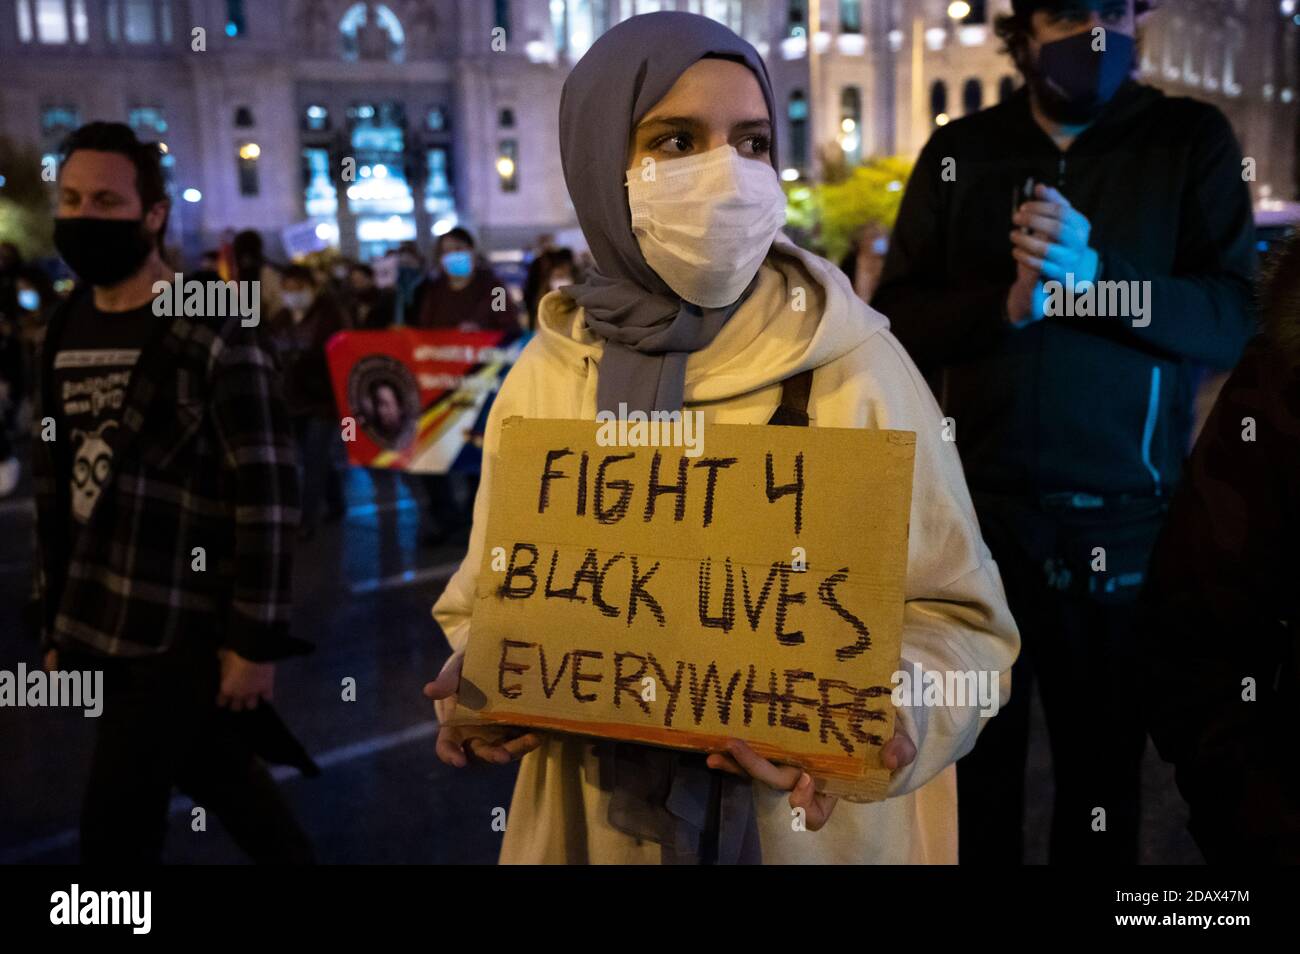 Madrid, Spain. 15th Nov, 2020. A woman carrying a placard supporting black lives during a protest against racism and xenophobia. Credit: Marcos del Mazo/Alamy Live News Stock Photo